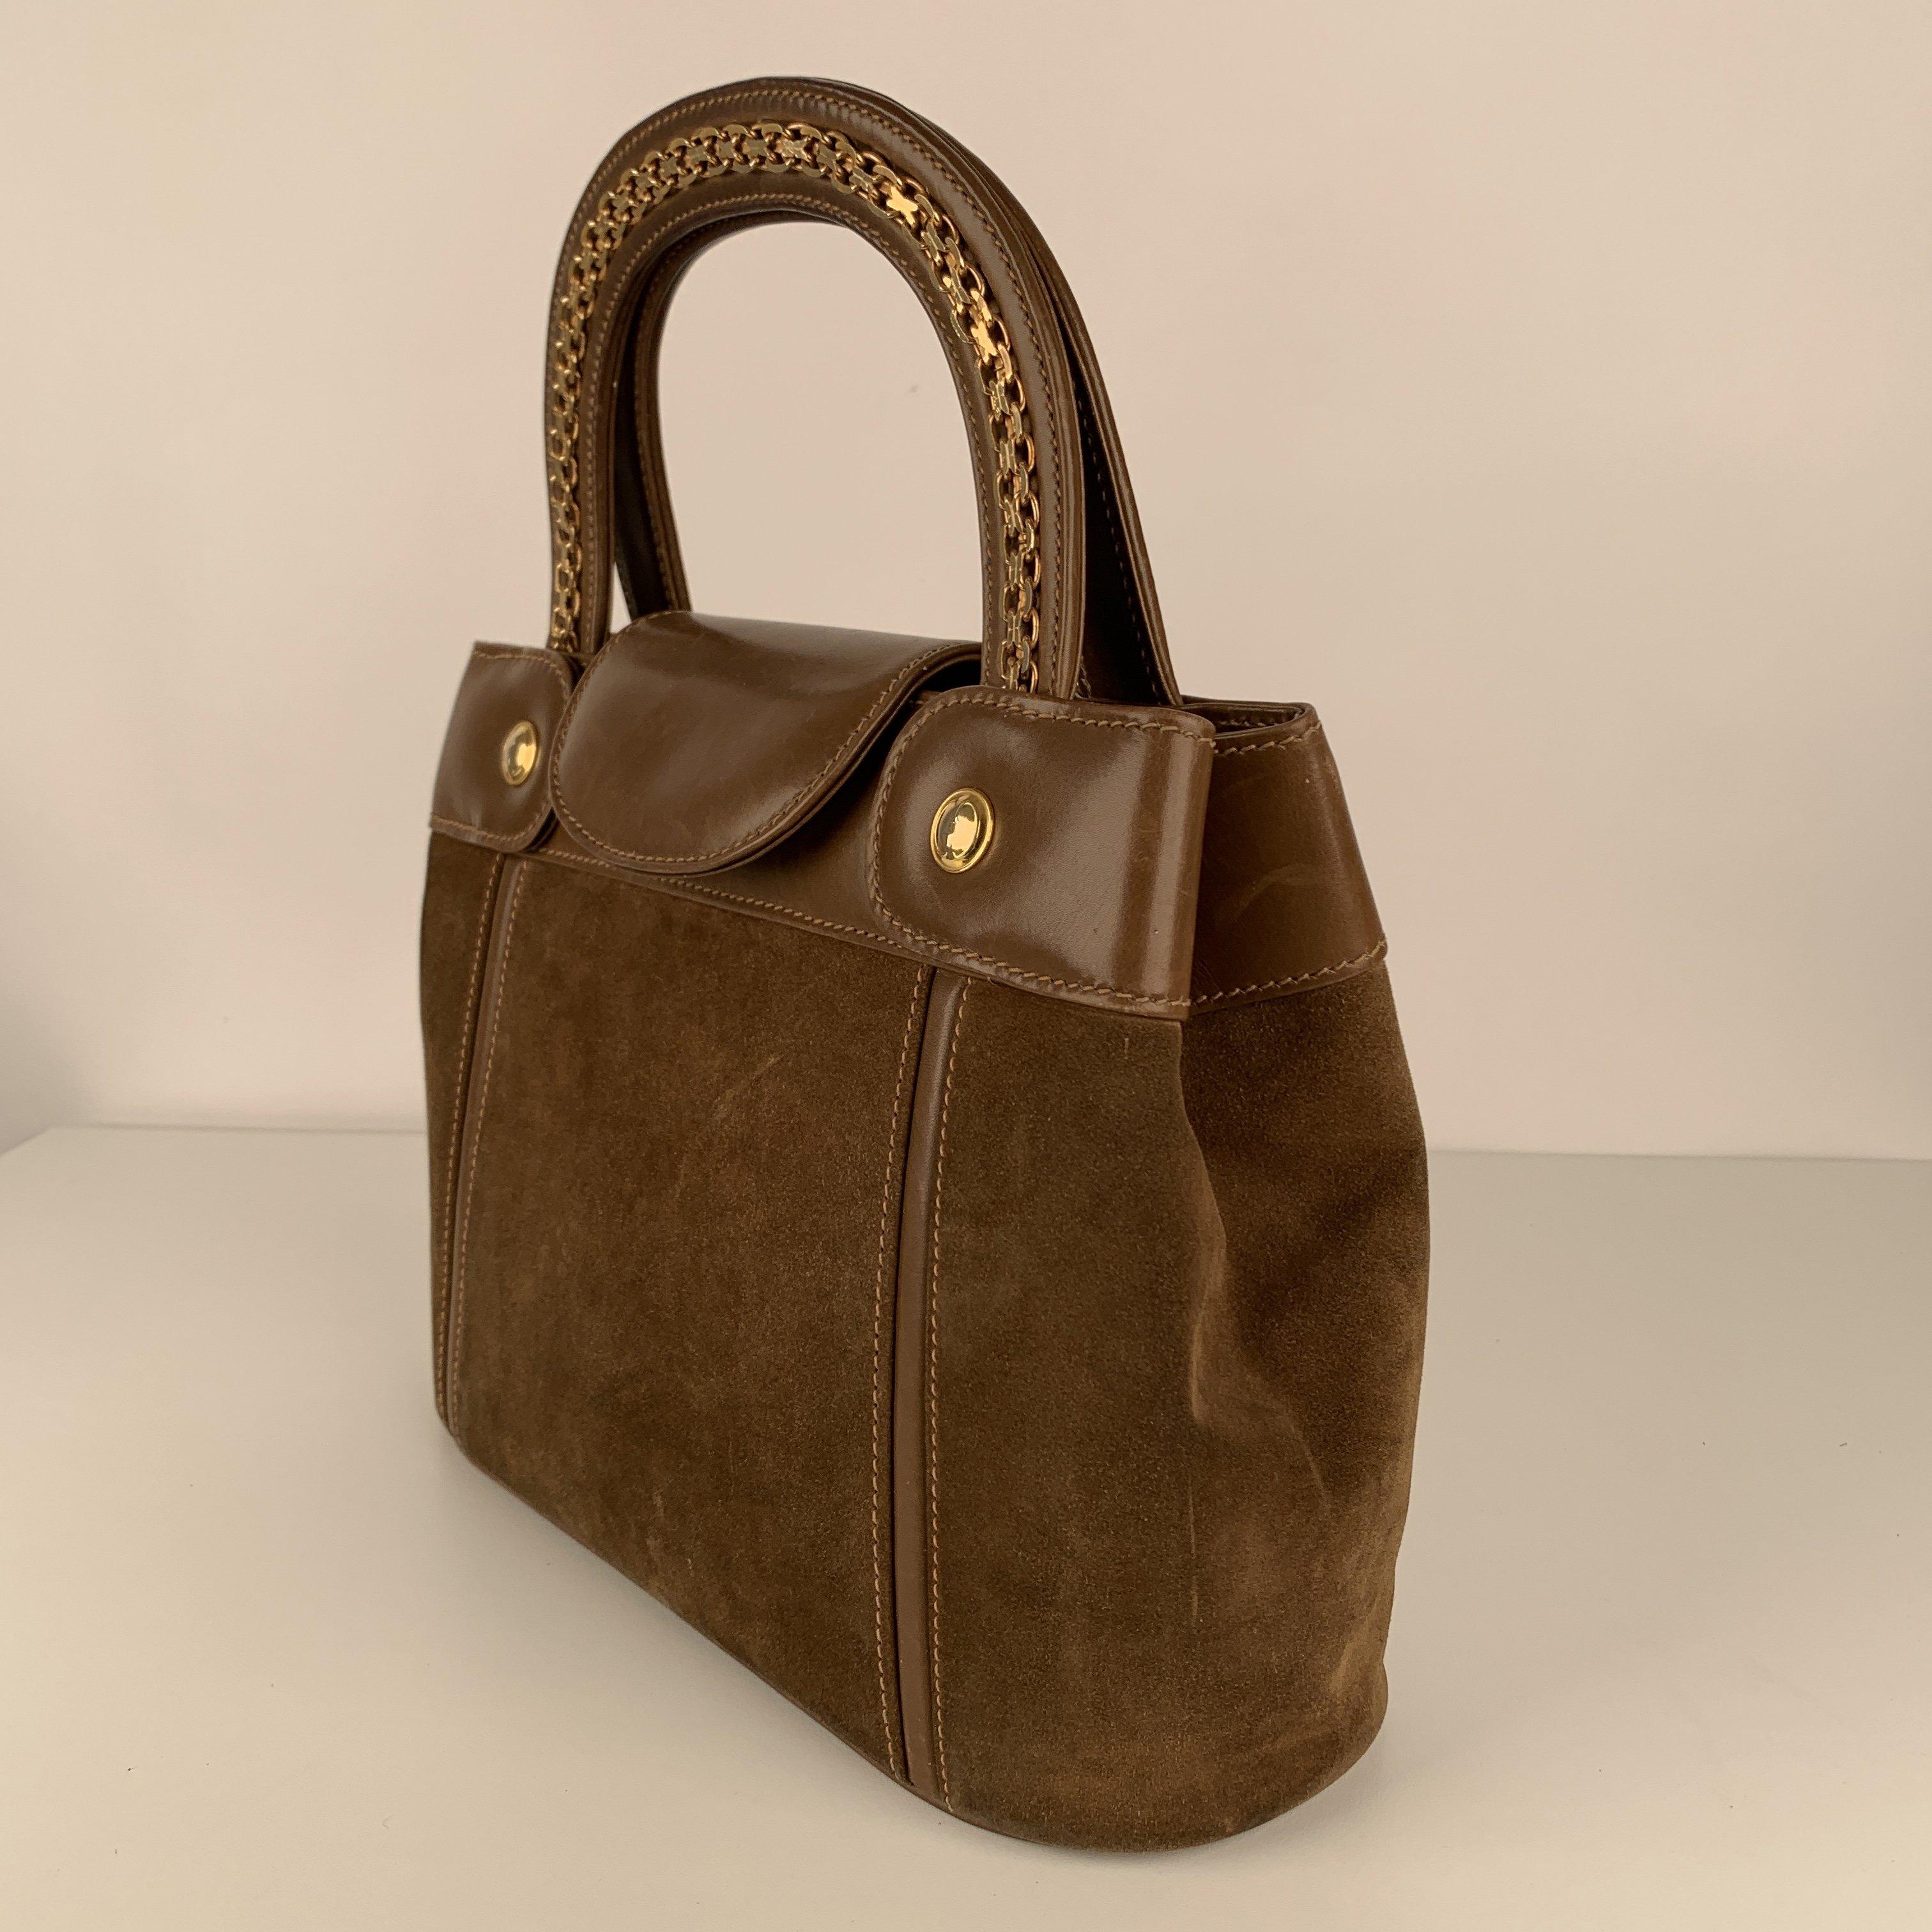 Brown Gucci Vintage Tan Suede Leather Tote Handbag with Chain Detail